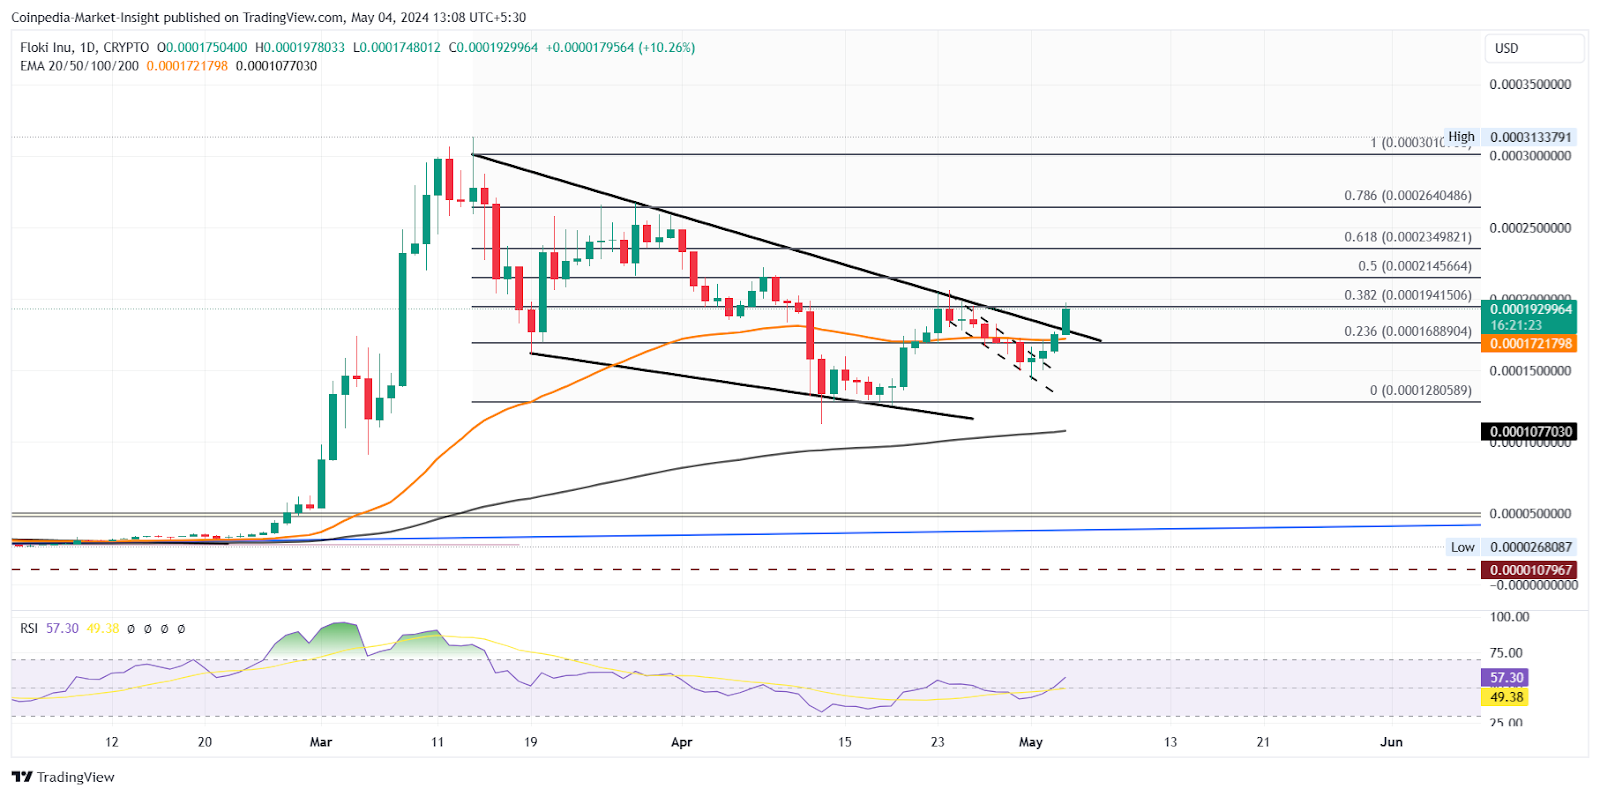 Top Altcoins With High Relief Rally Chances Next Week